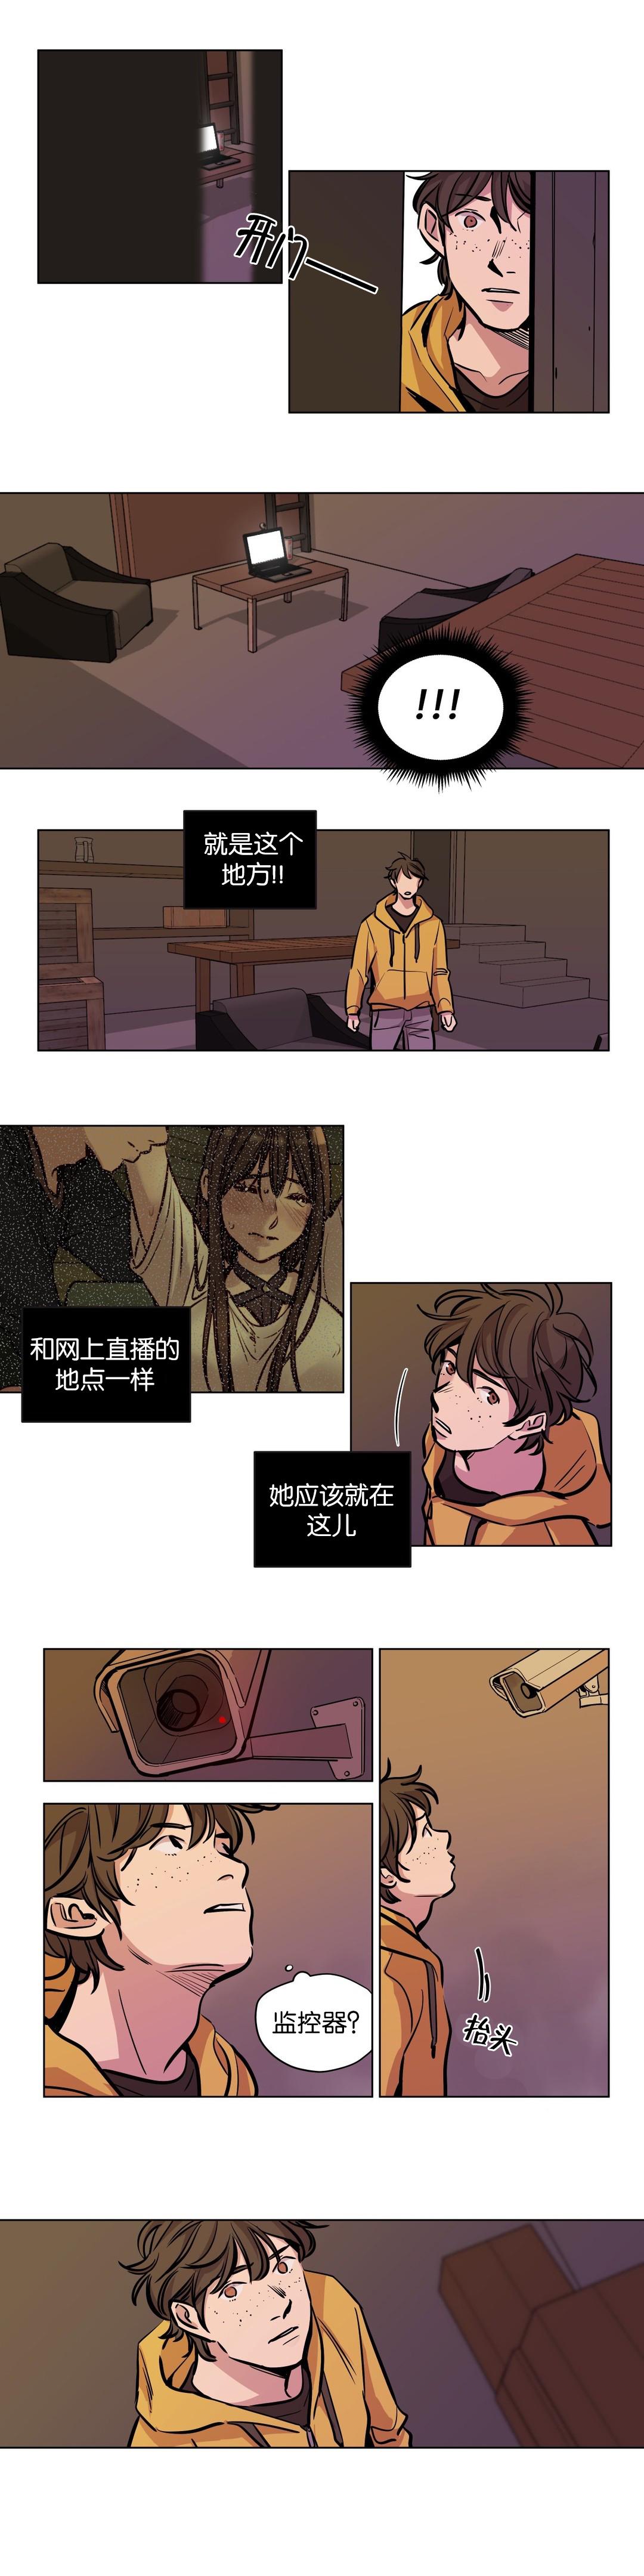 [Ramjak] 赎罪营(Atonement Camp) Ch.50-52 (Chinese) 15